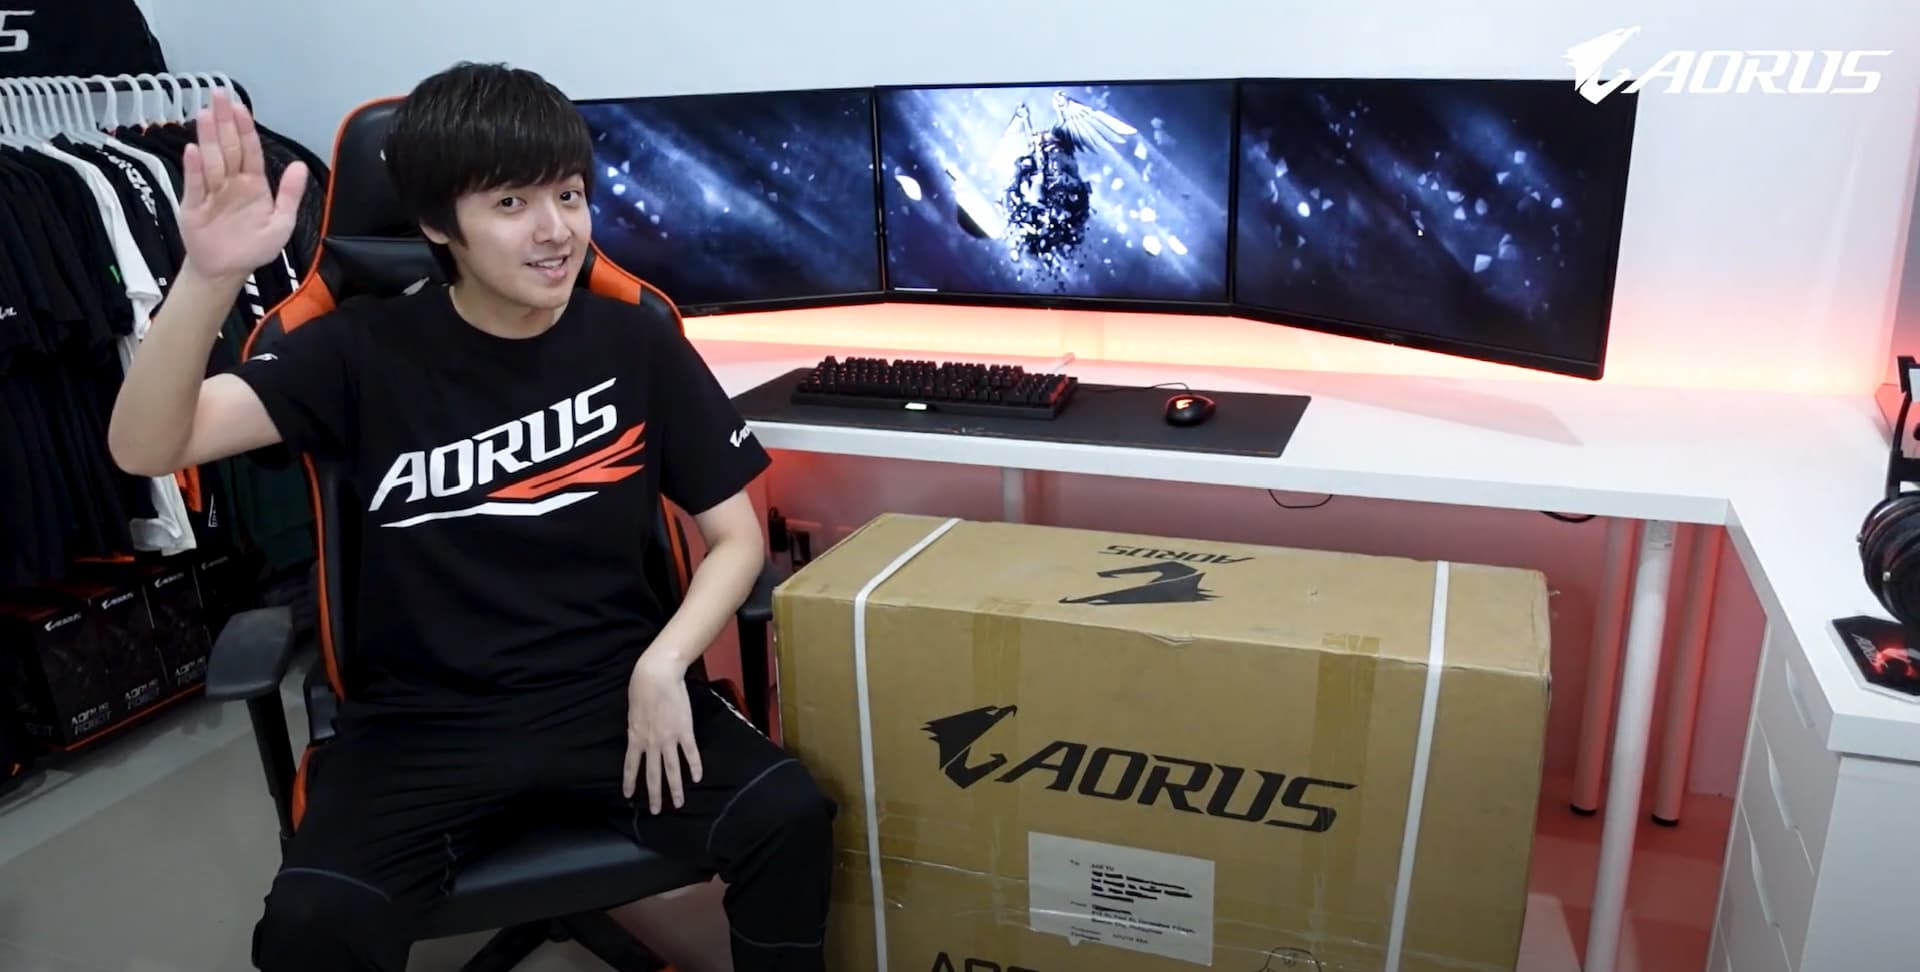 【Member Submission】Ace's NEW AORUS Gaming Chair Unboxing!